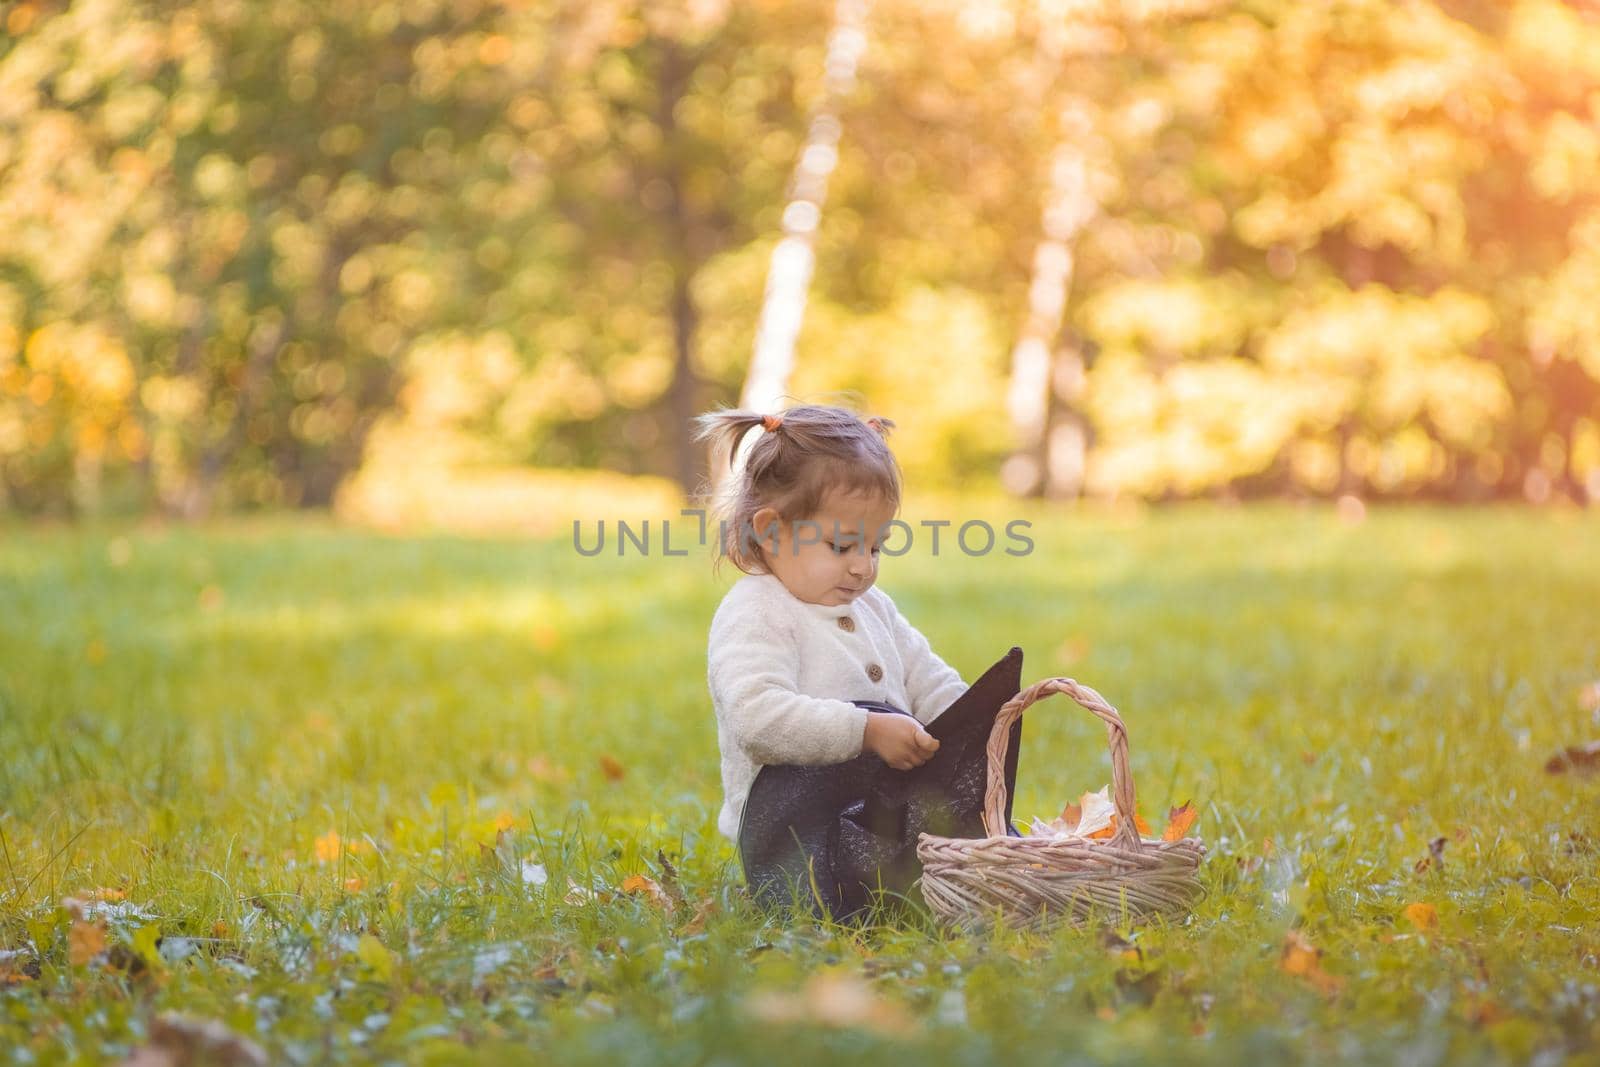 halloween celebration concept. cute toddler playing with witch hat on the lawn in the autumn park on a sunny day.